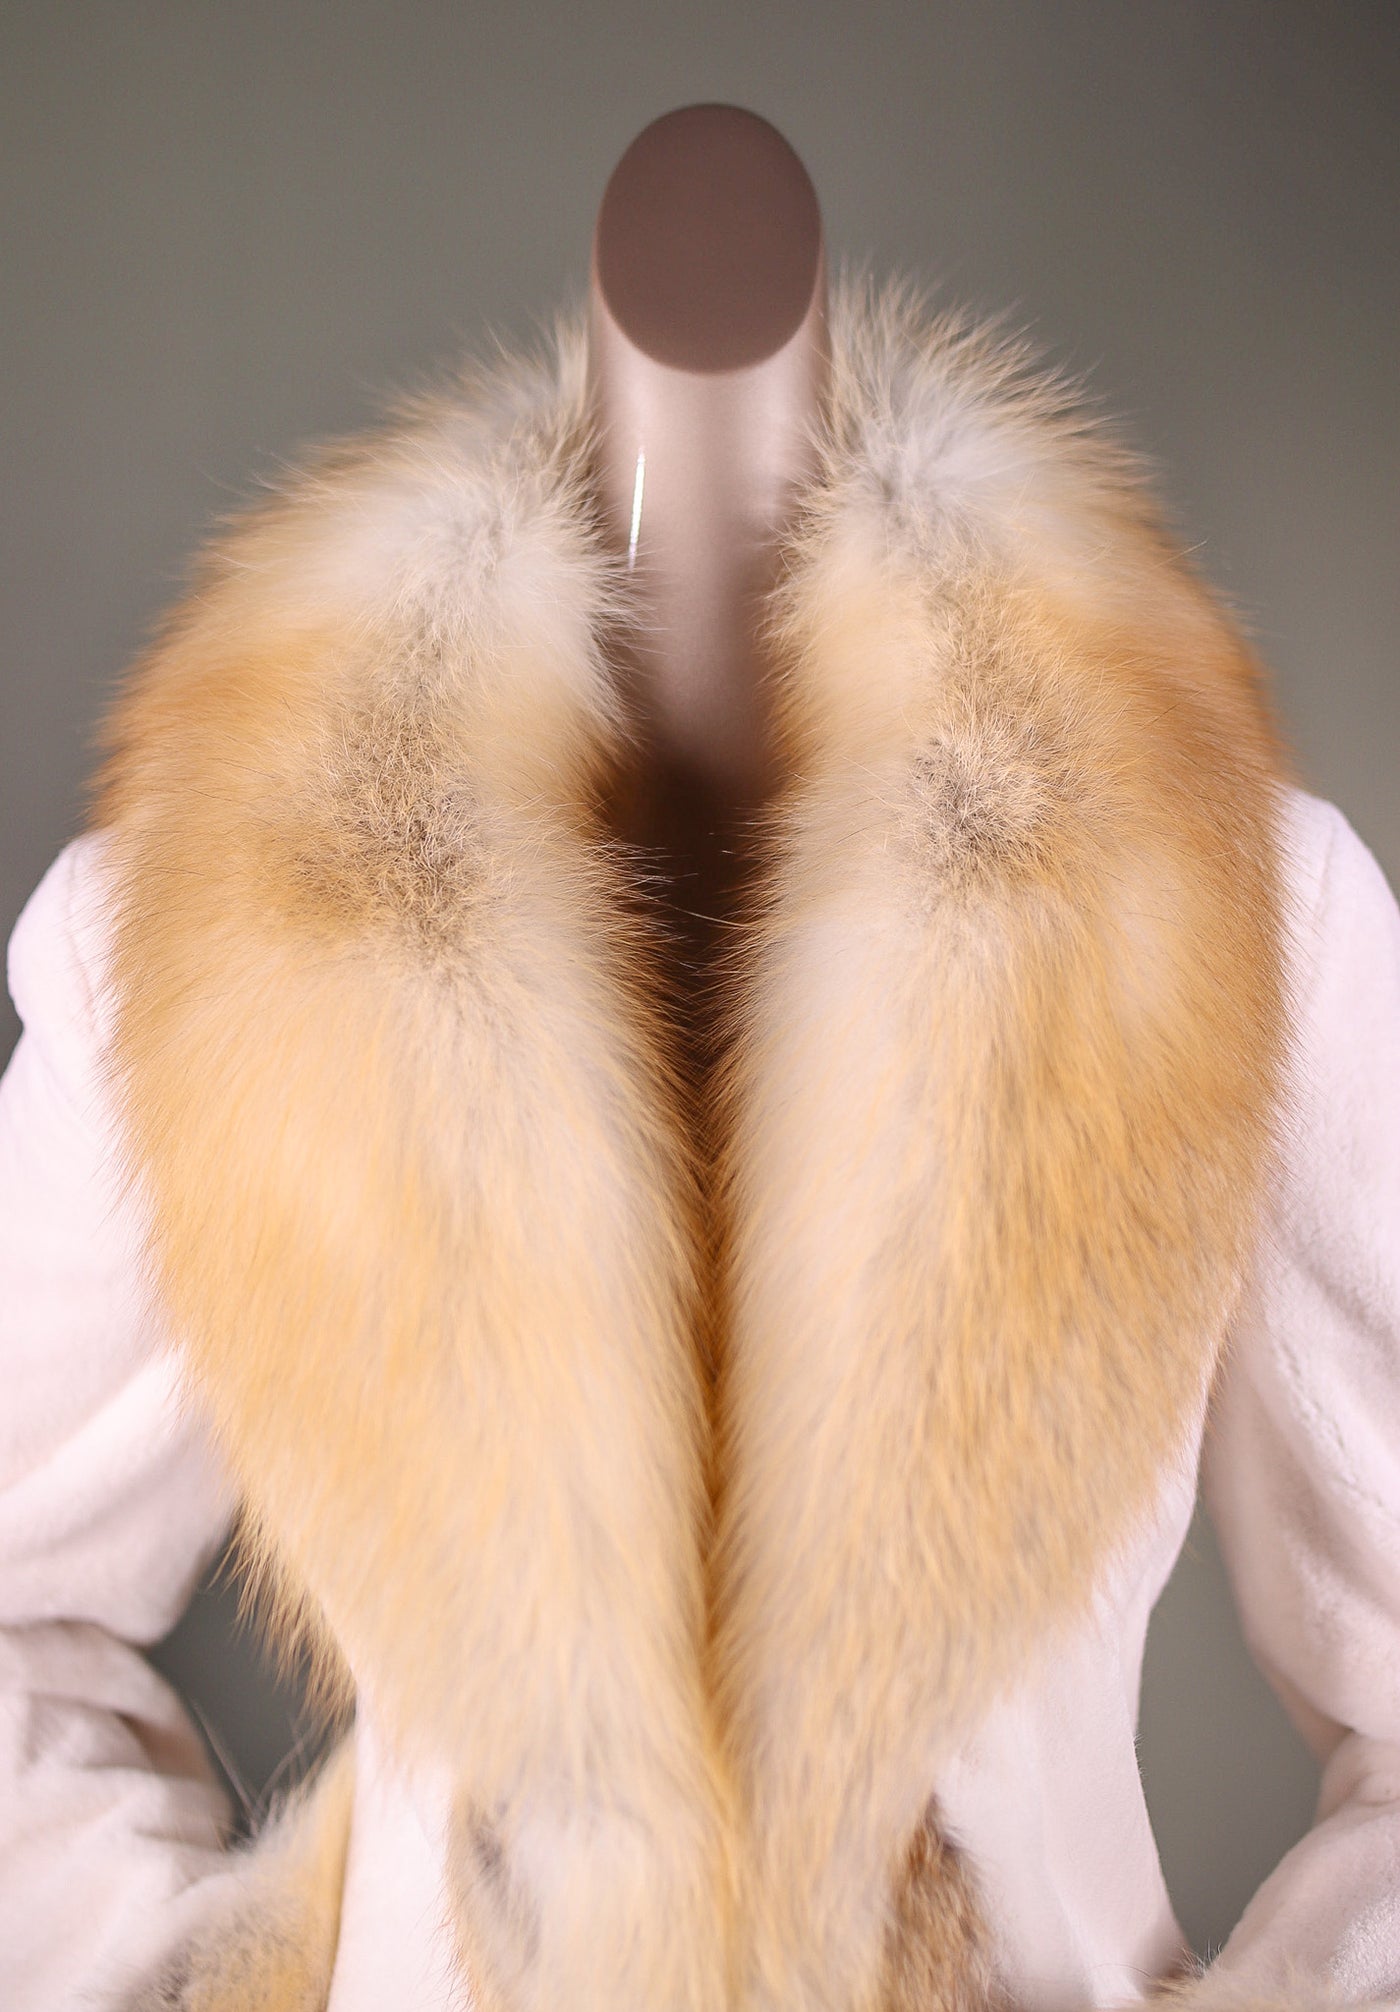 Sheared Mink Jacket with Golden Isle Fox Tuxedo and Cuffs